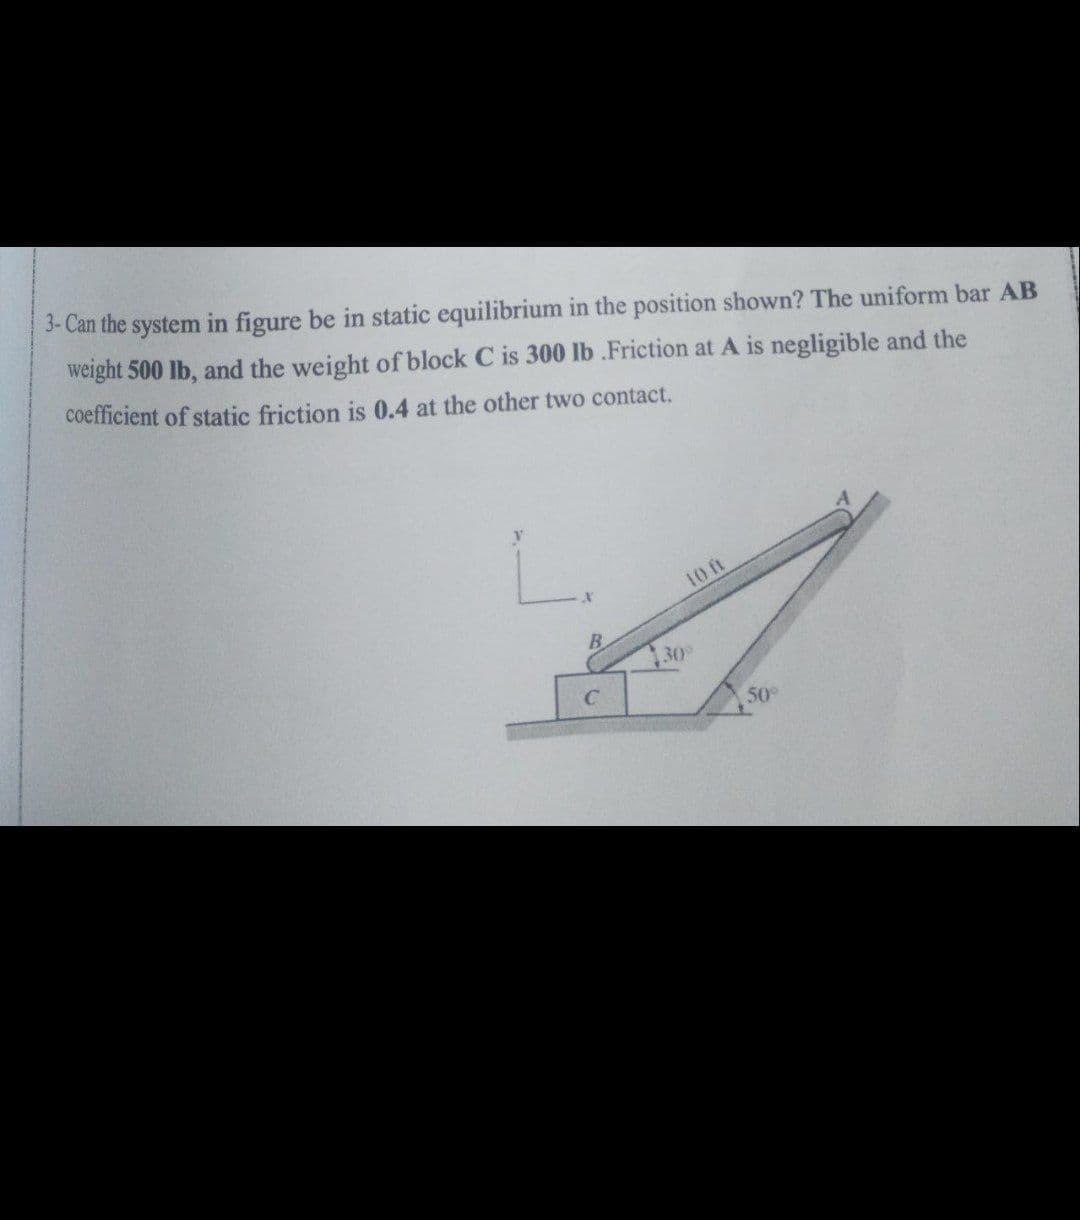 3- Can the system in figure be in static equilibrium in the position shown? The uniform bar AB
weight 500 lb, and the weight of block C is 300 lb .Friction at A is negligible and the
coefficient of static friction is 0.4 at the other two contact.
L.
10 ft
B.
30
50
